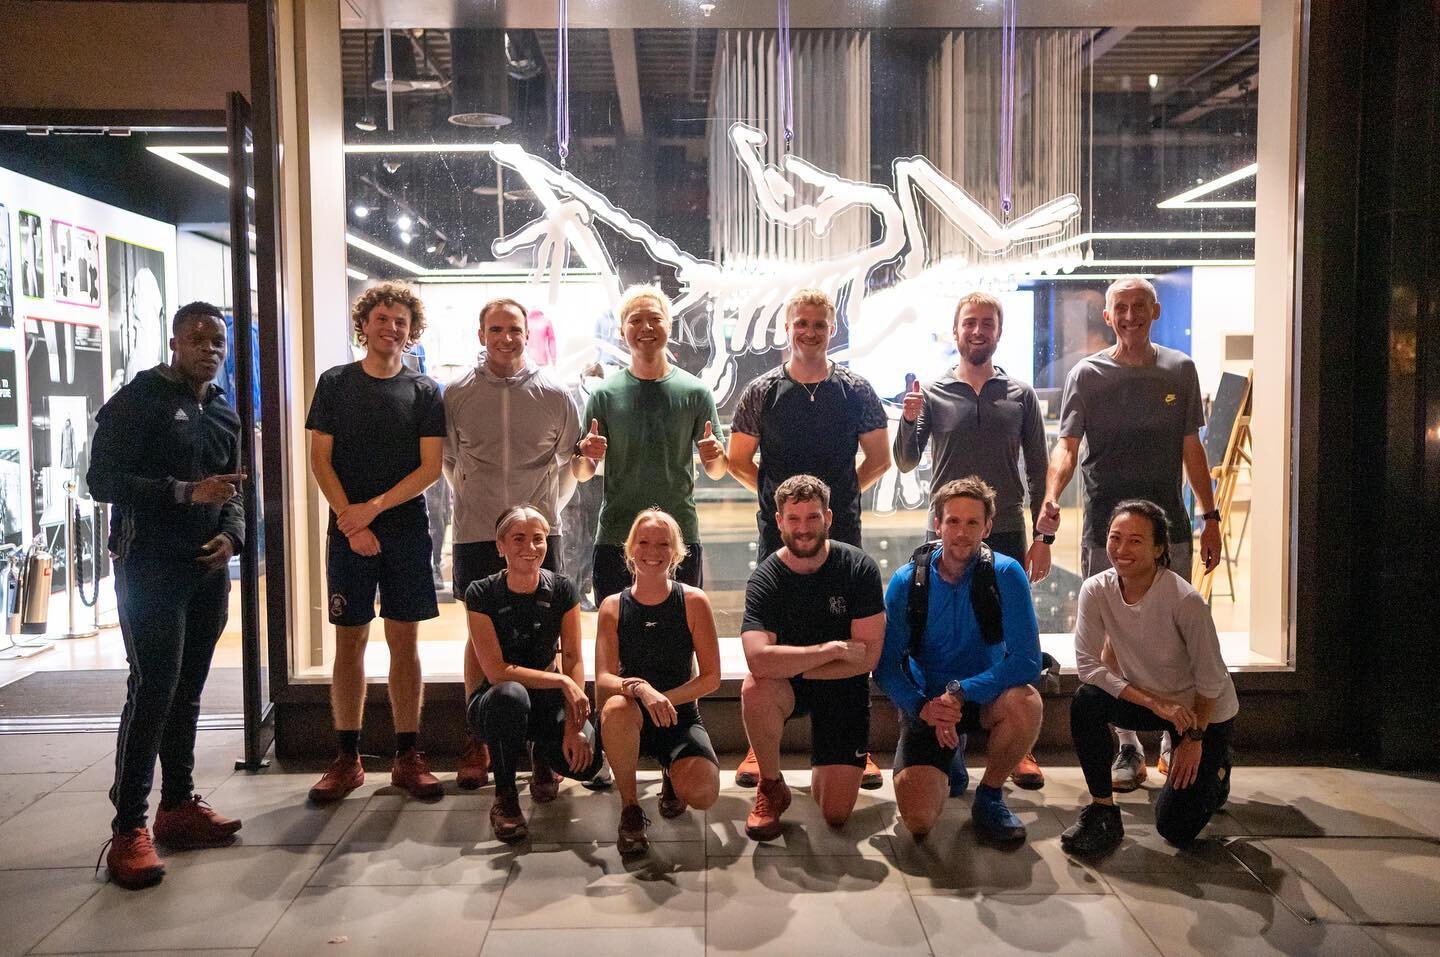 Last week was Arc&rsquo;teryx last S&amp;C Run Club for the year. Next we will have one more social run with @lucyrochruns before the end of the year. Last weeks session was focused on improving your Lactic threshold. 

This is what the session looke